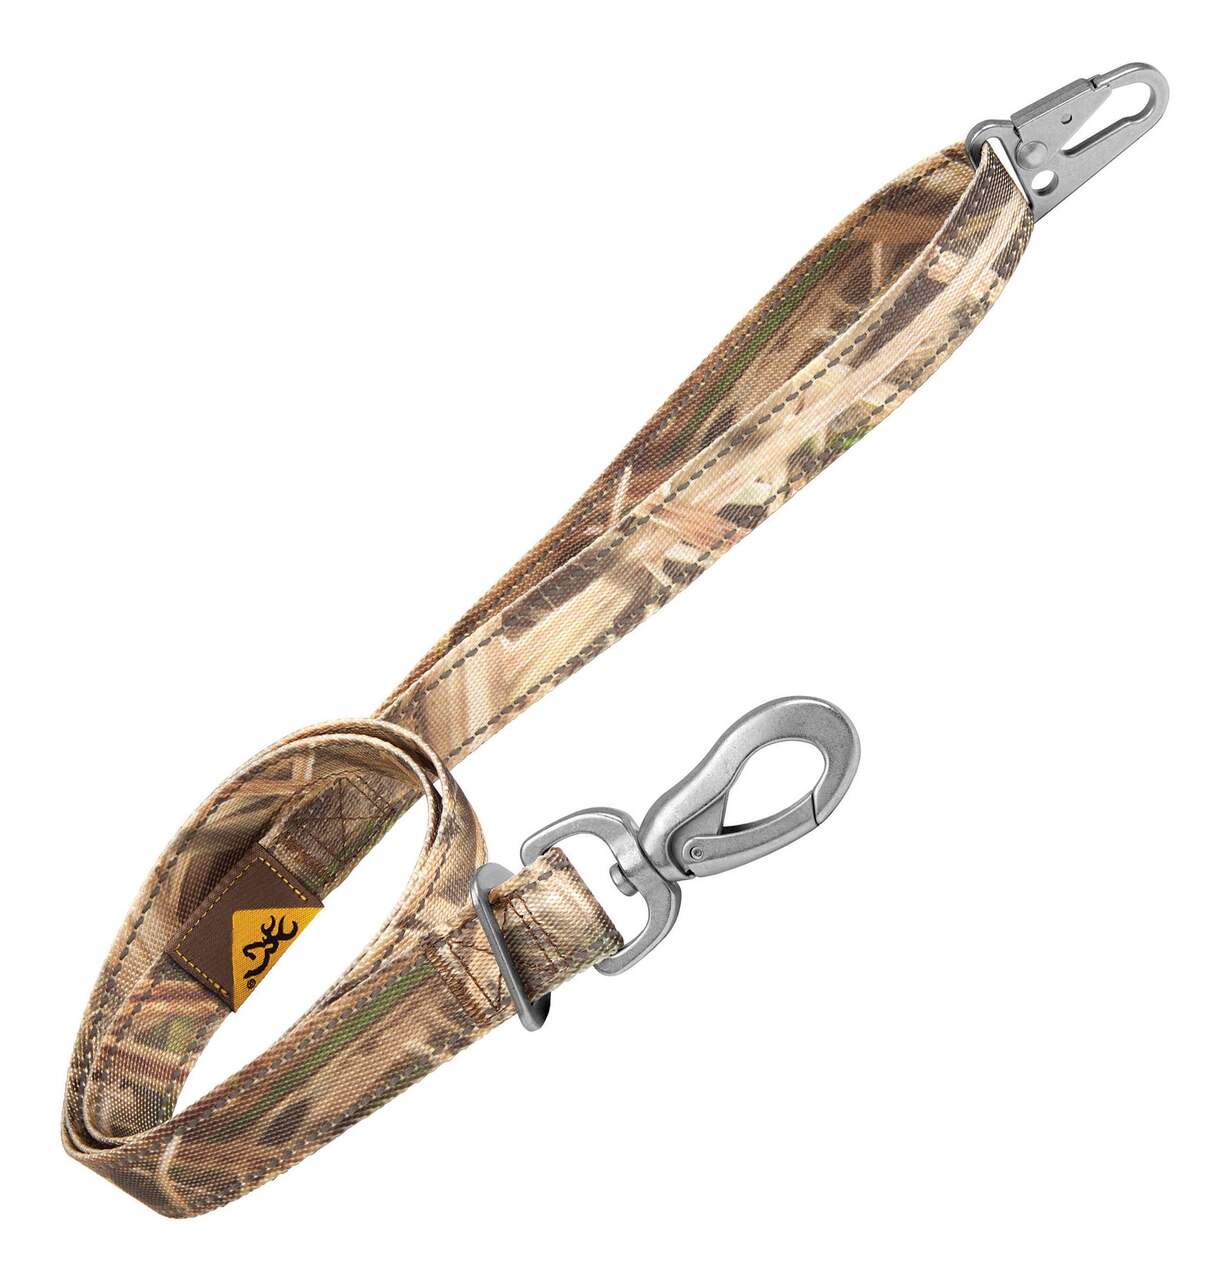 https://media-www.canadiantire.ca/product/playing/hunting/hunting-accessories/1758777/browning-mossy-oak-blades-classic-webbing-leash-large-46b39c77-b71f-4c3b-9d32-4315725058c0-jpgrendition.jpg?imdensity=1&imwidth=640&impolicy=mZoom